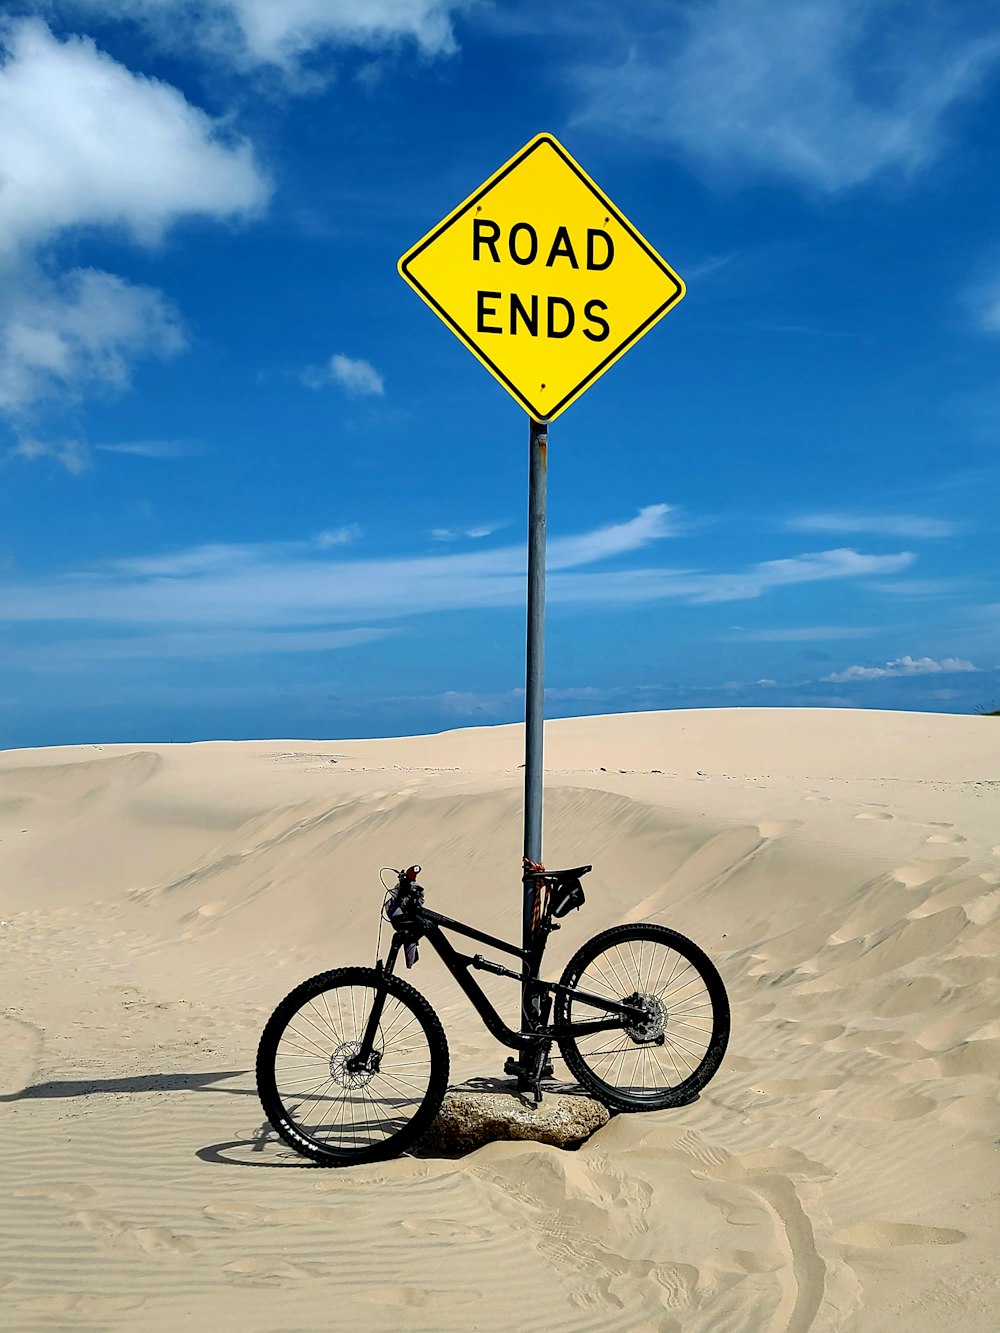 a bike leaning against a road sign in the sand